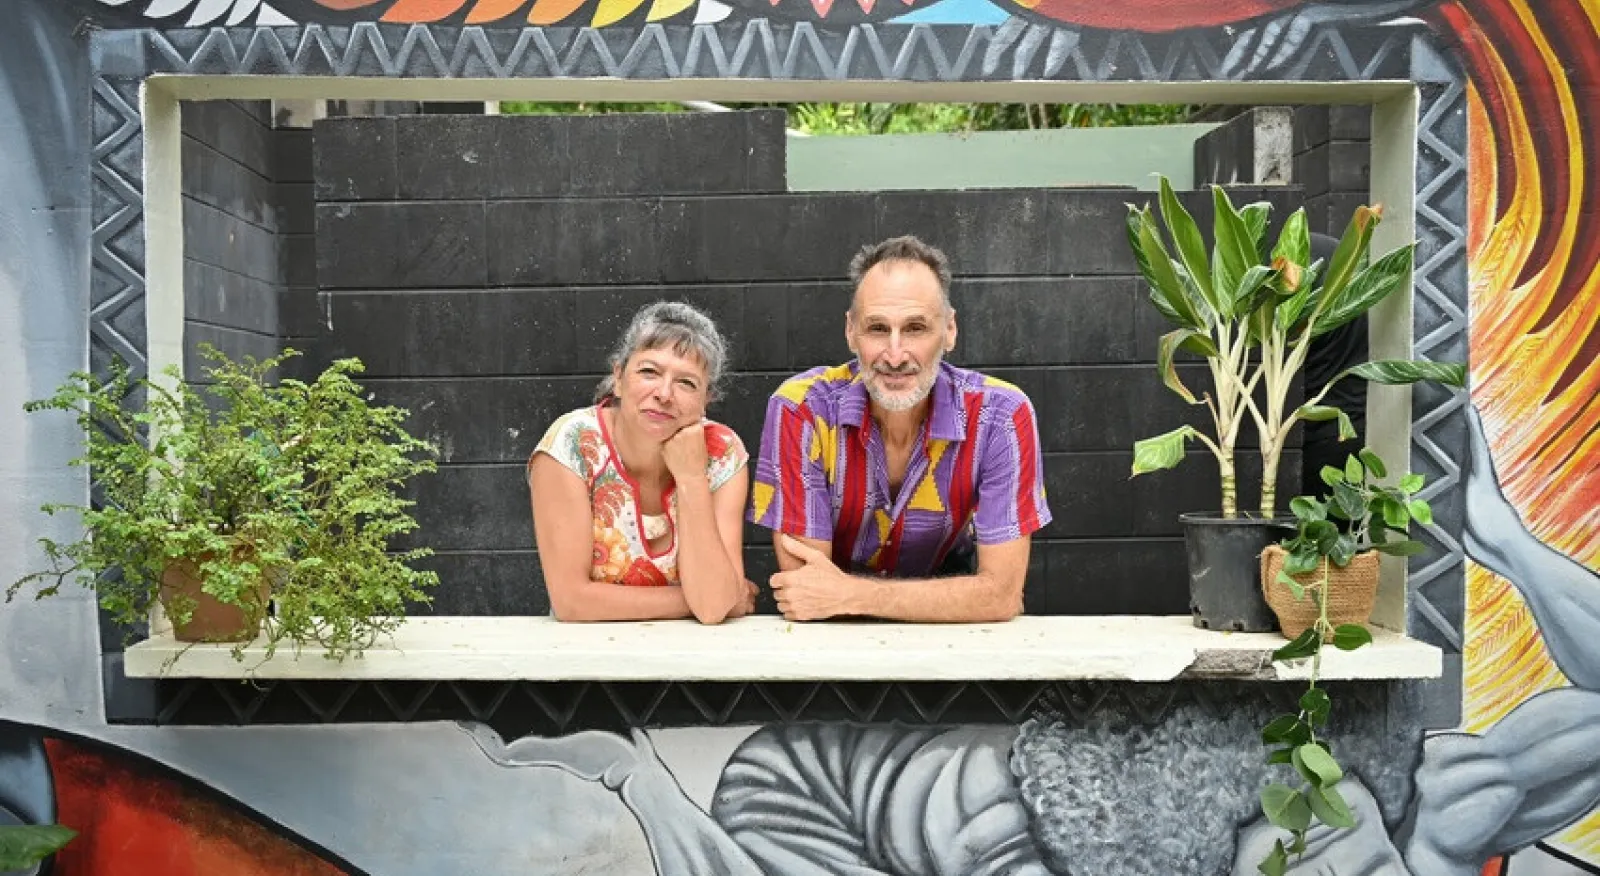 two people lean on a ledge in a window, framed by colourful artwork